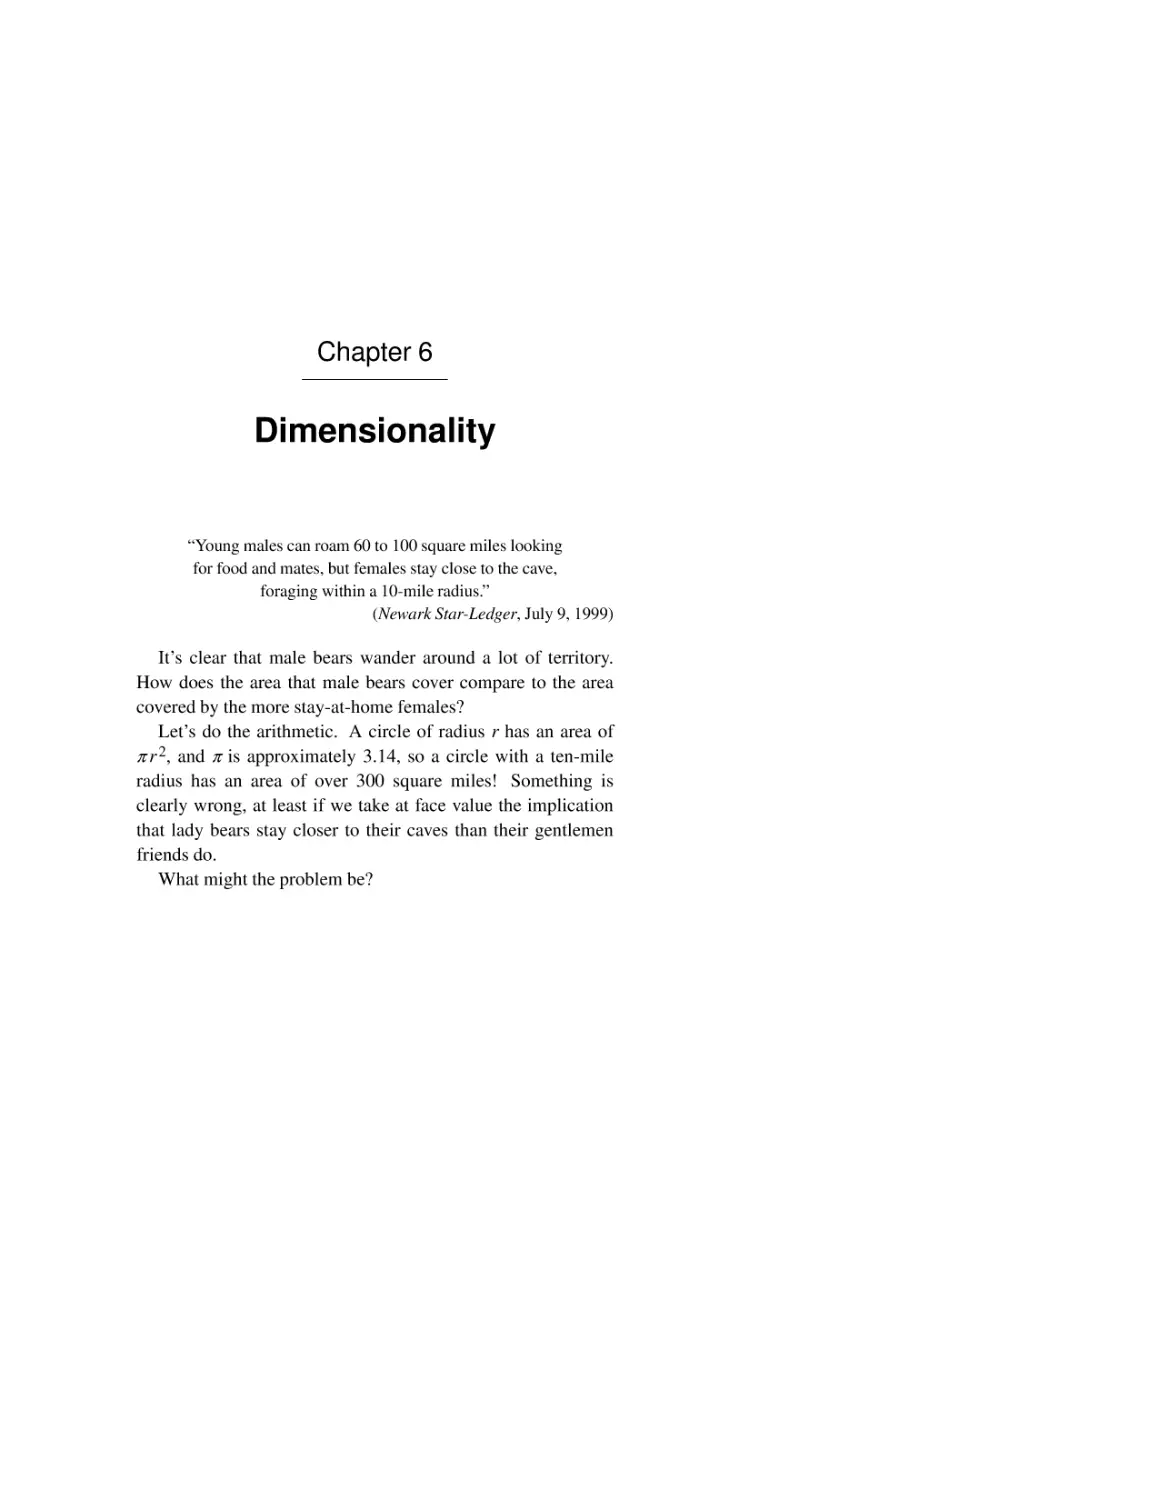 6 Dimensionality